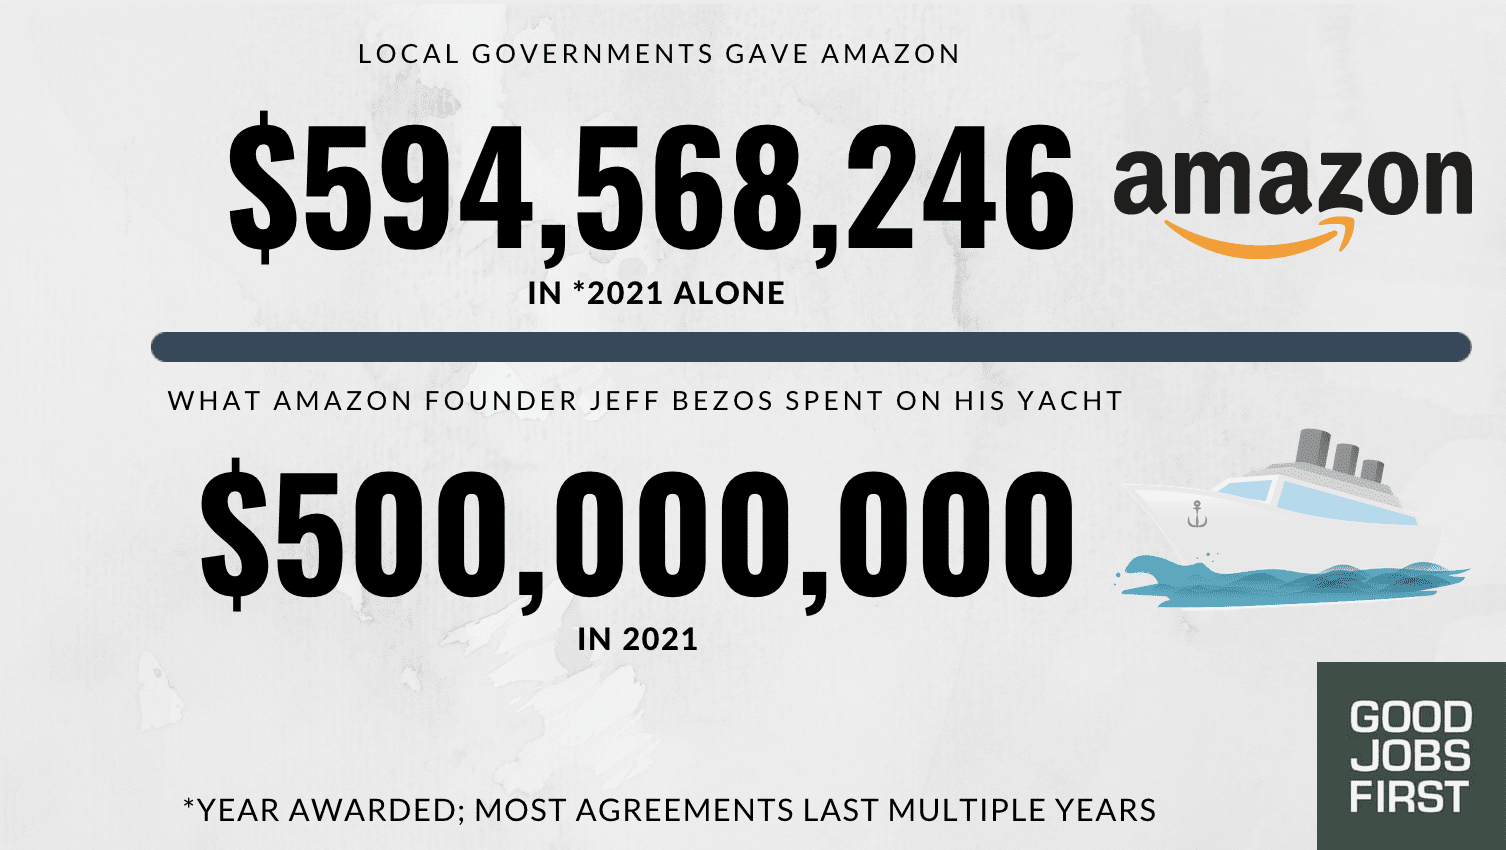 Text shows how Amazon has gotten over $500 million in subsidies in 2021 alone and spent $500 million on a yacht.